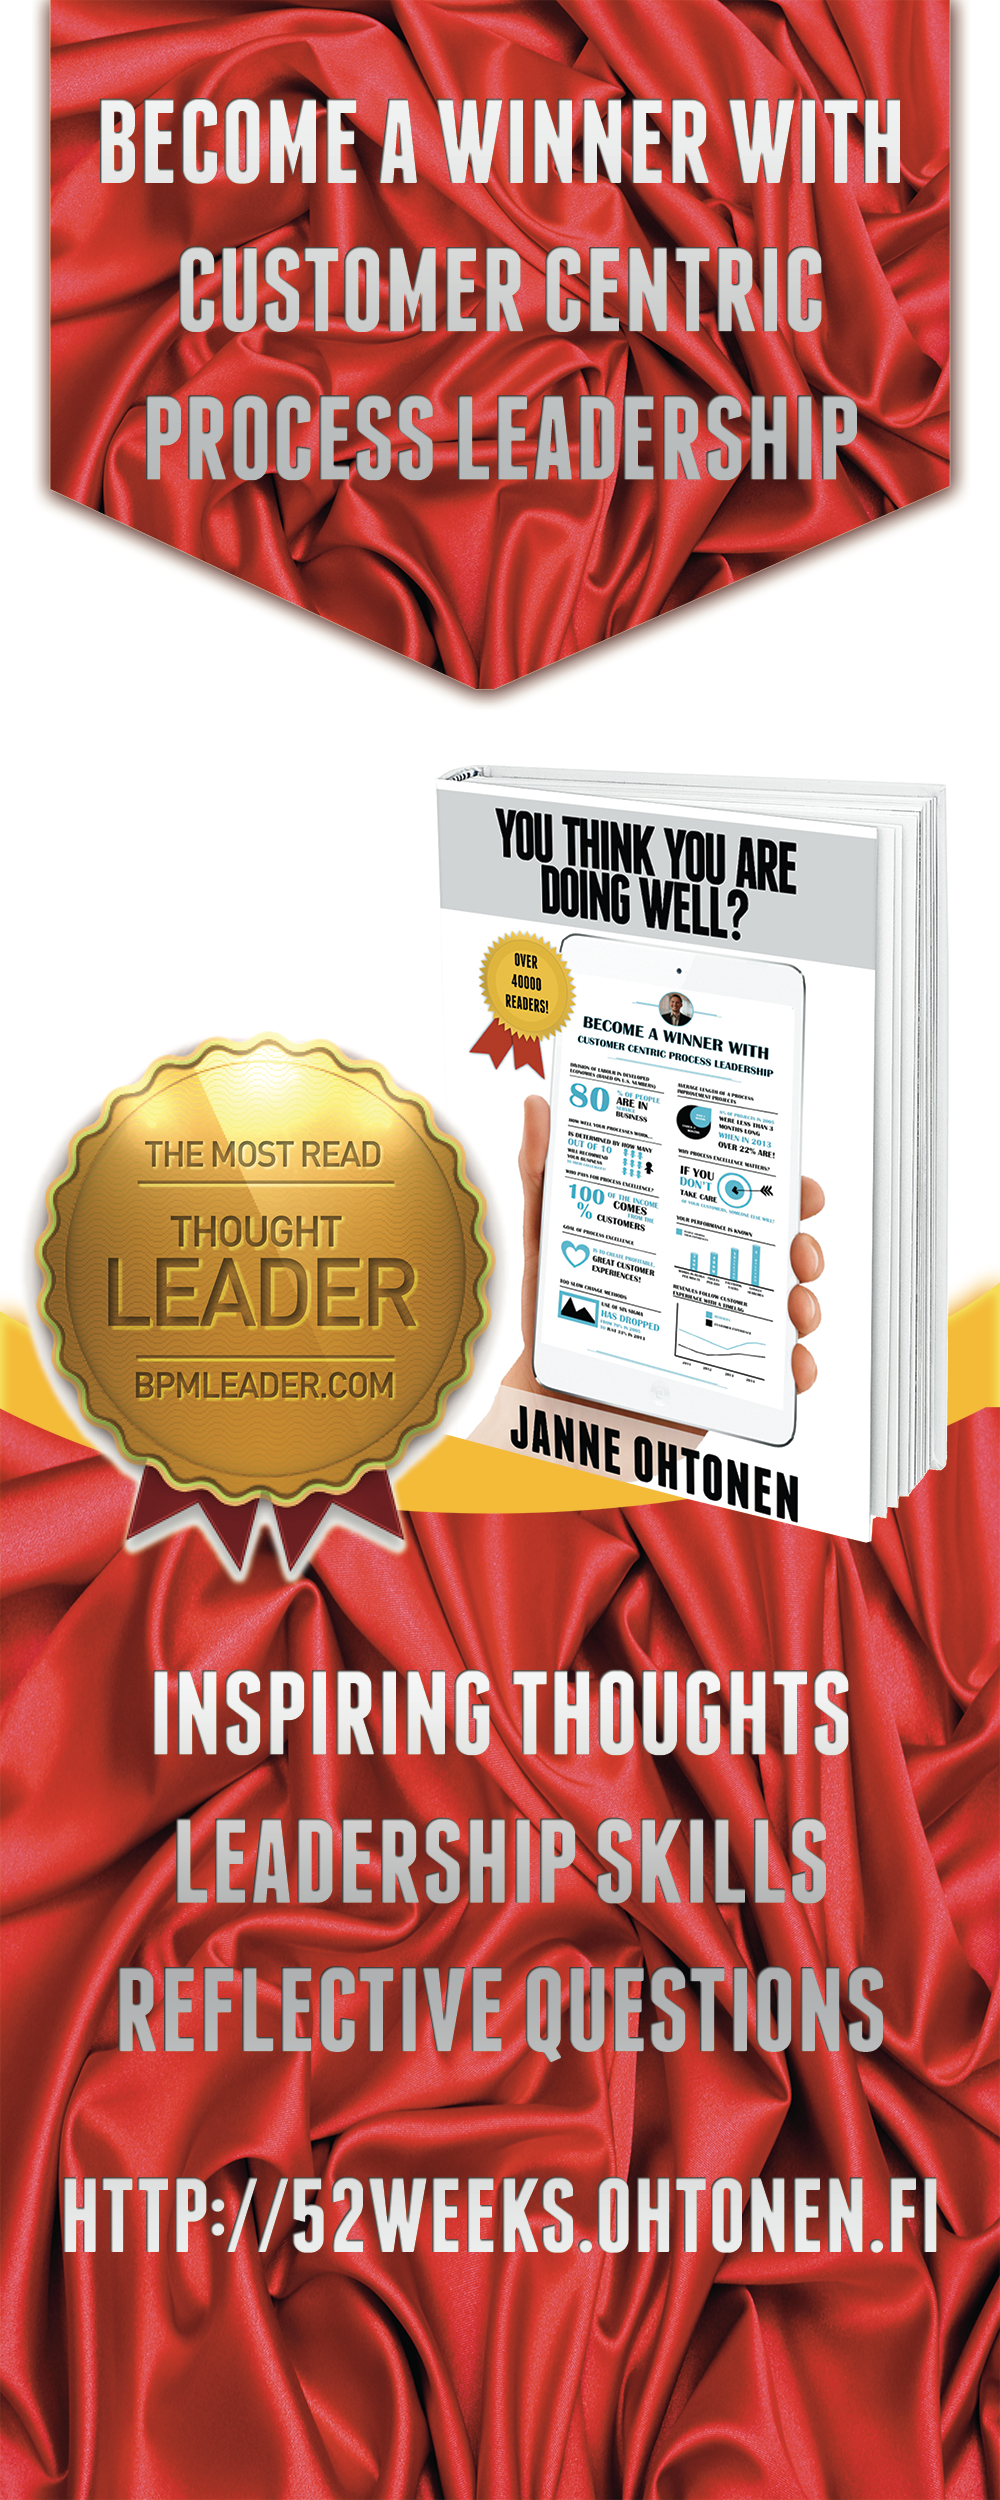 You Think You Are Doing Well? Become a Winner With Customer-Centric Process Leadership